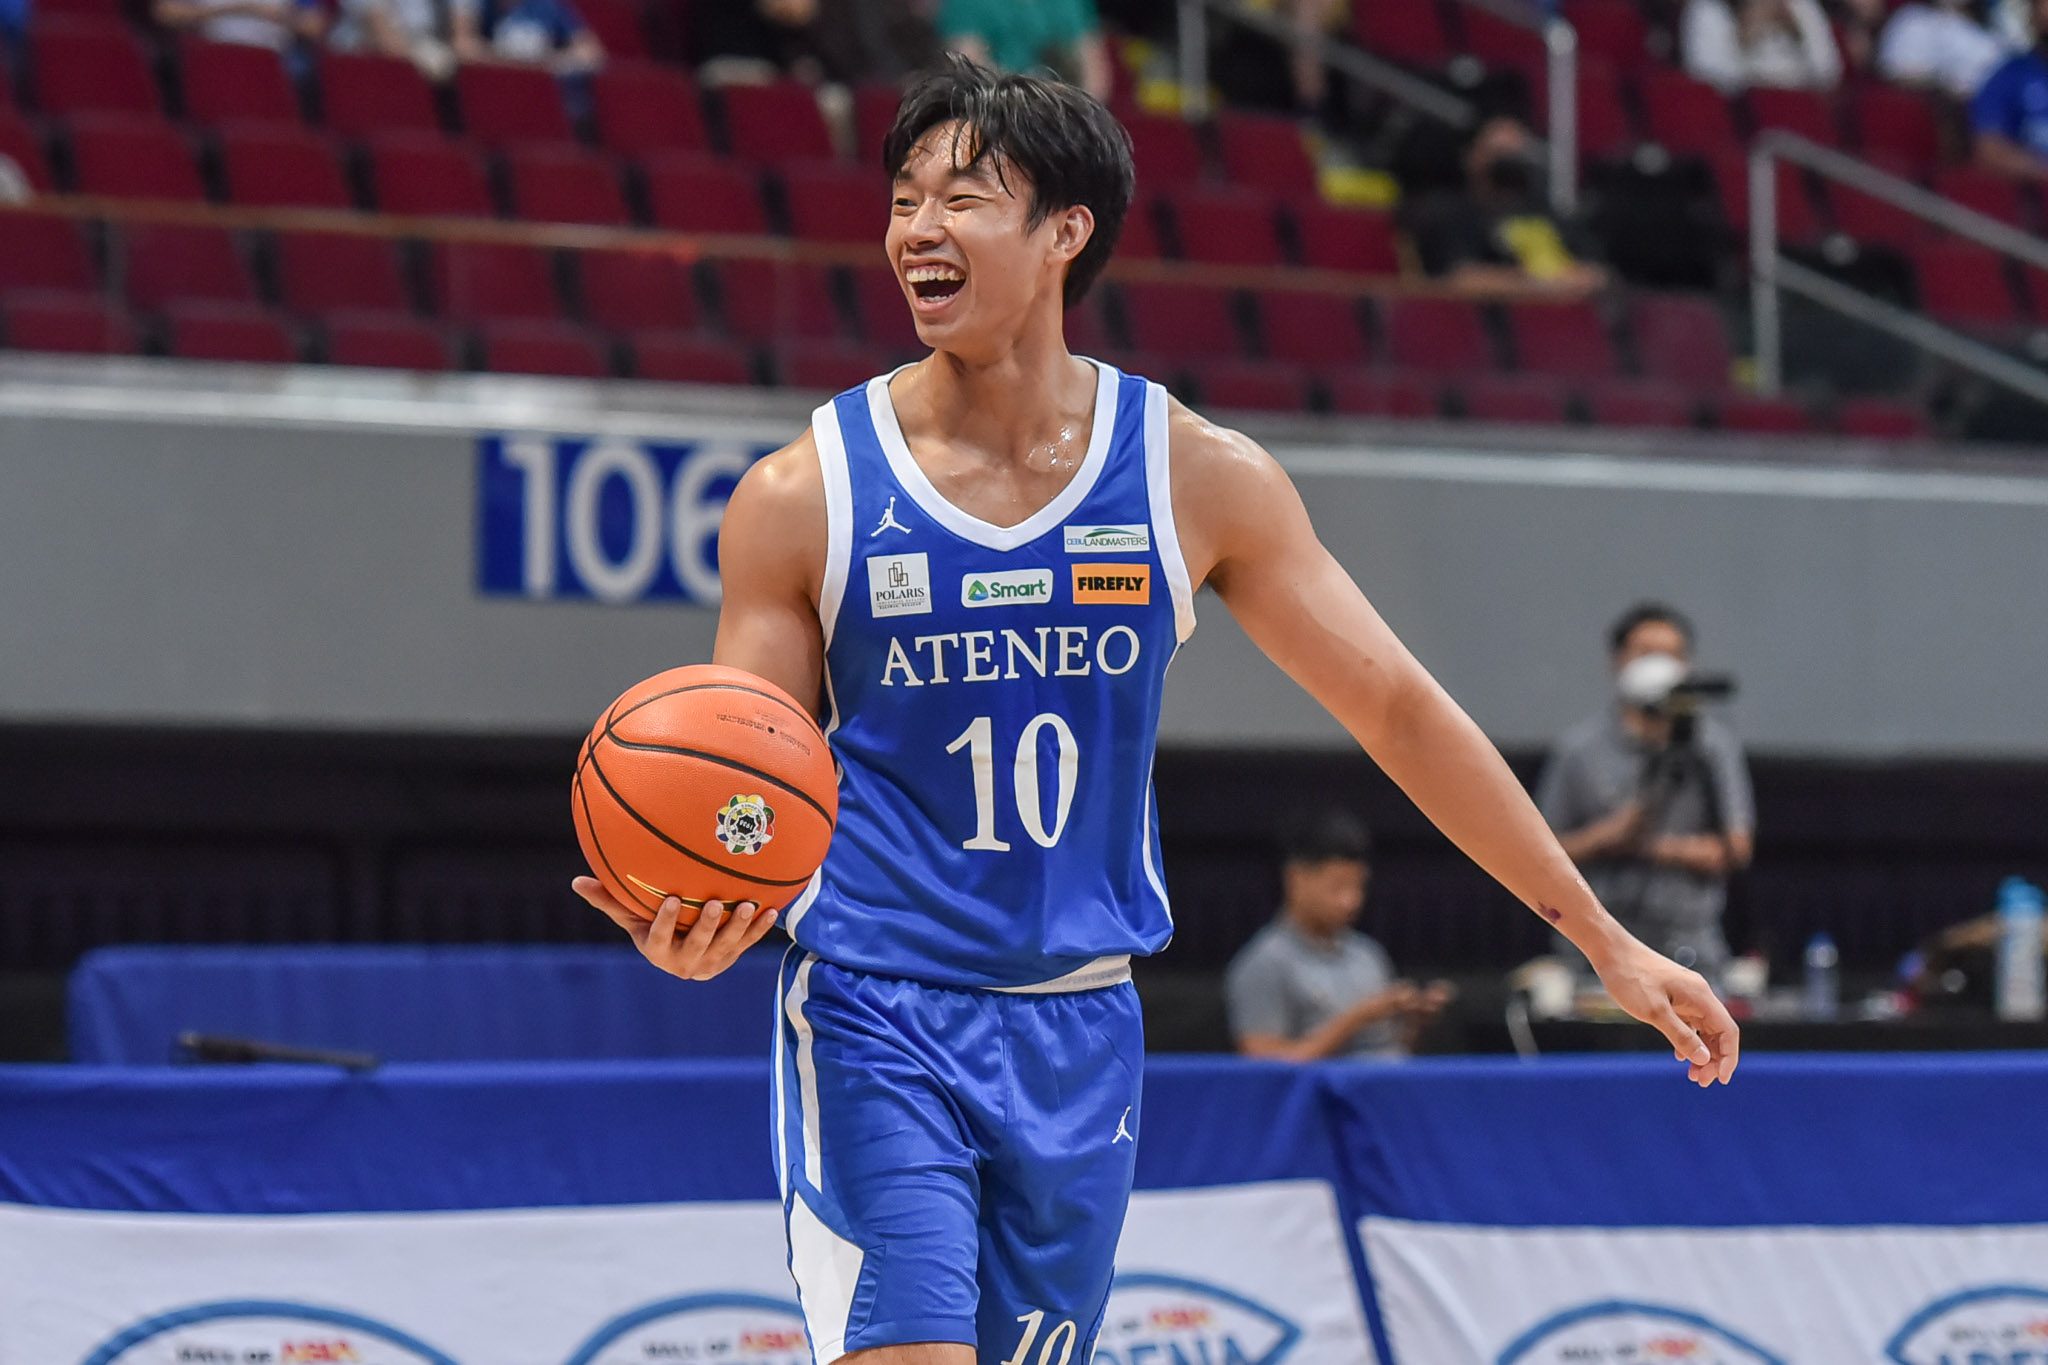 Mighty Ateneo holds winless UE to 3 second-quarter points in Final Four clincher